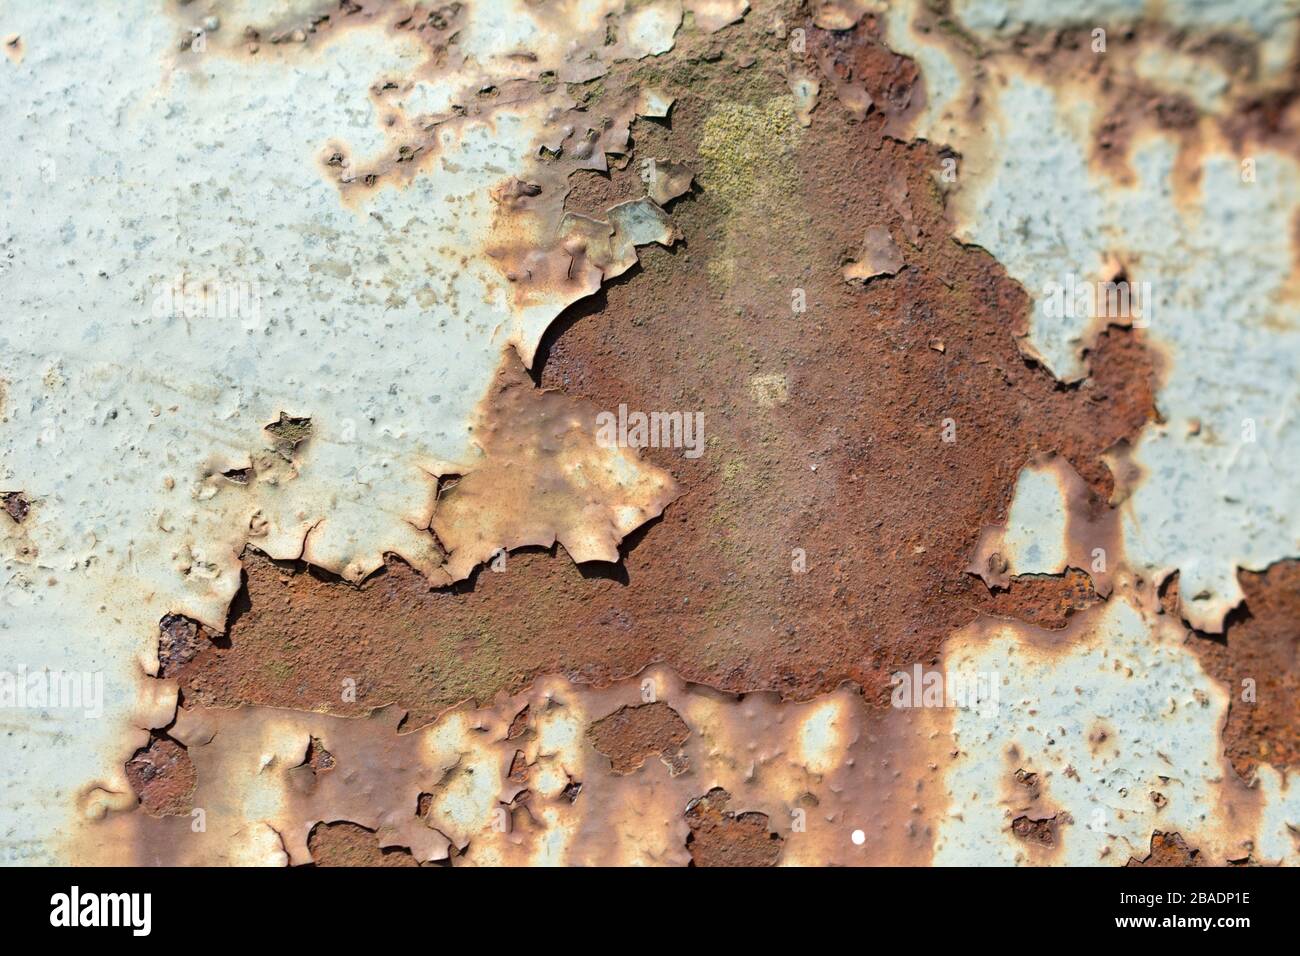 Rusty metal surface with flaking old white paint Stock Photo